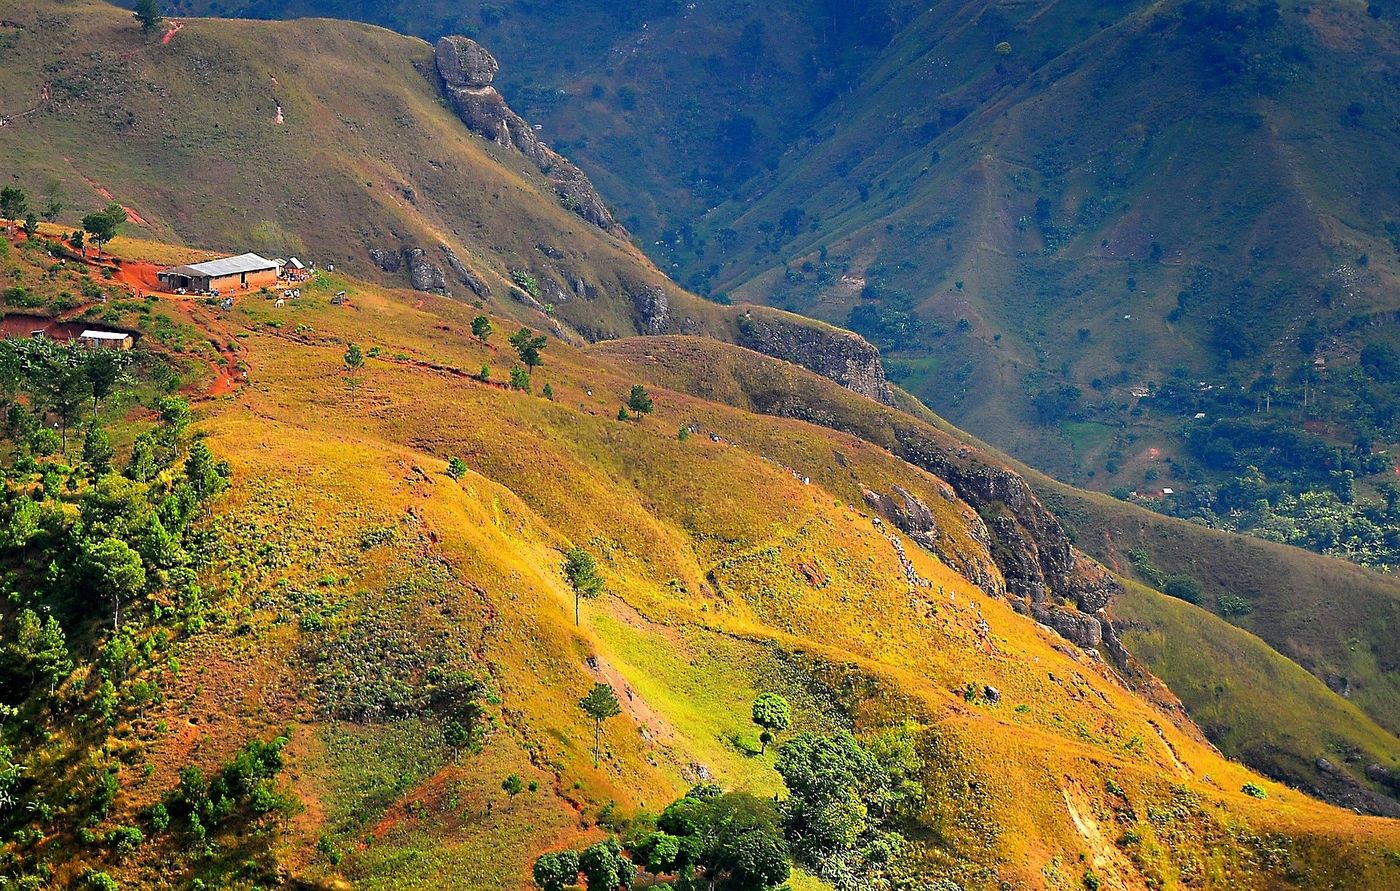 Deforested mountains cover Haiti. Photo: Phys.org